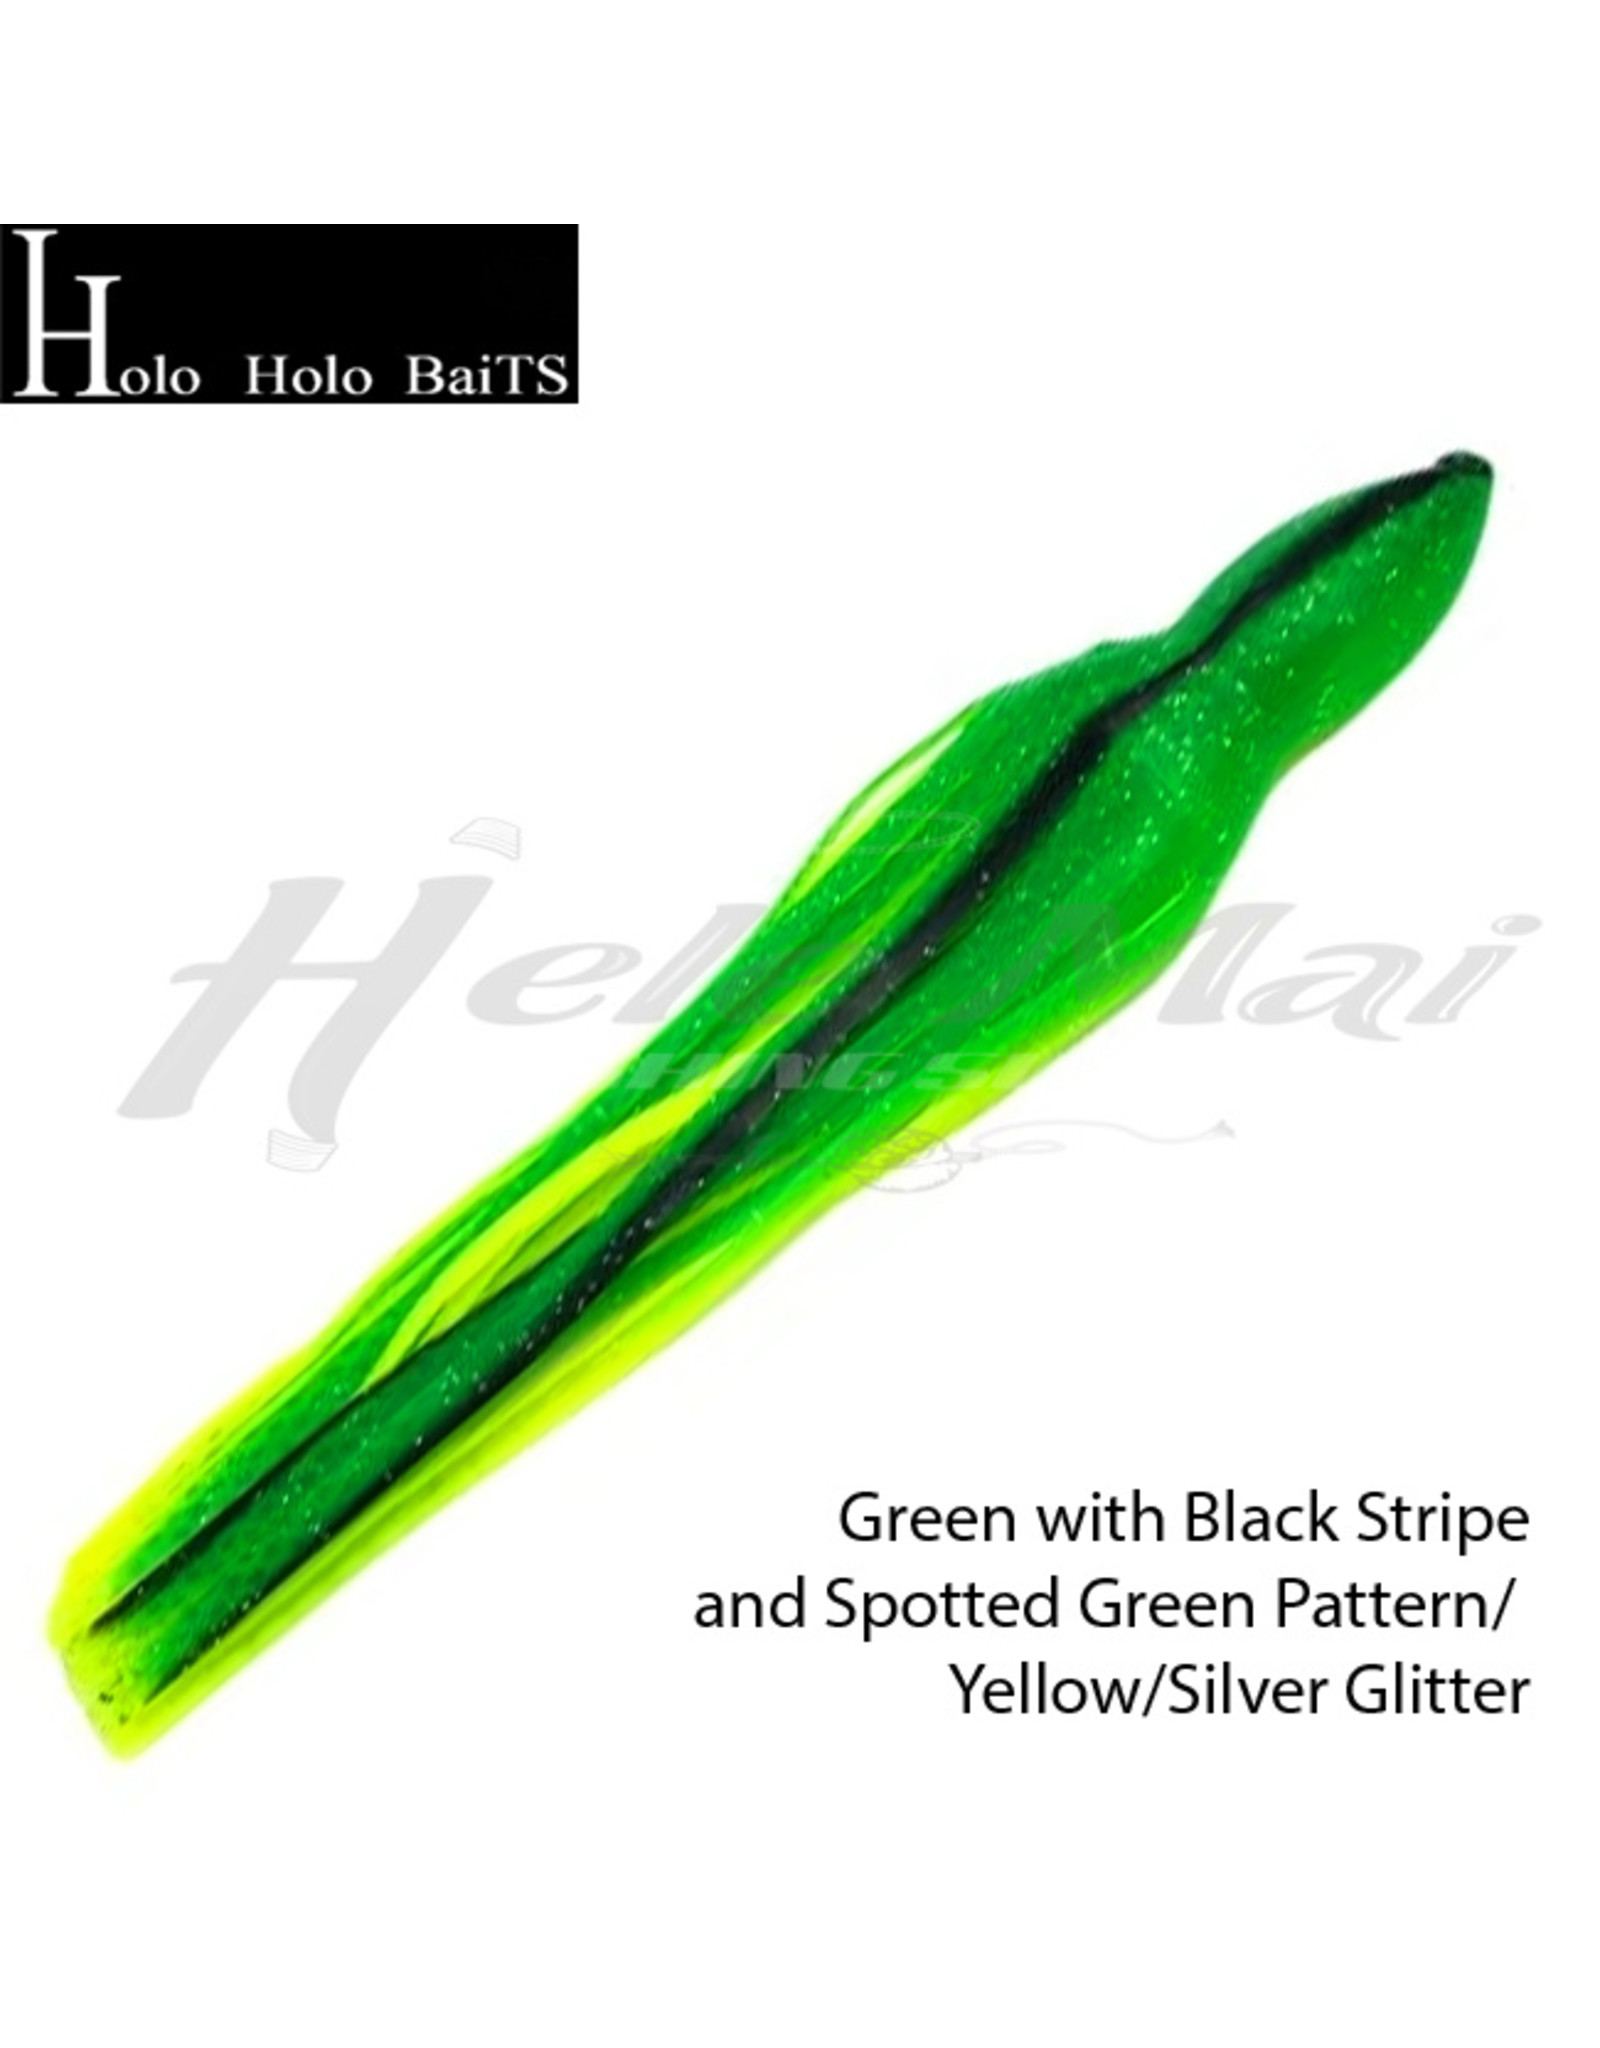 HOLO HOLO HH, 9" SQUID SKIRT FROG GREEN YELLOW 0099